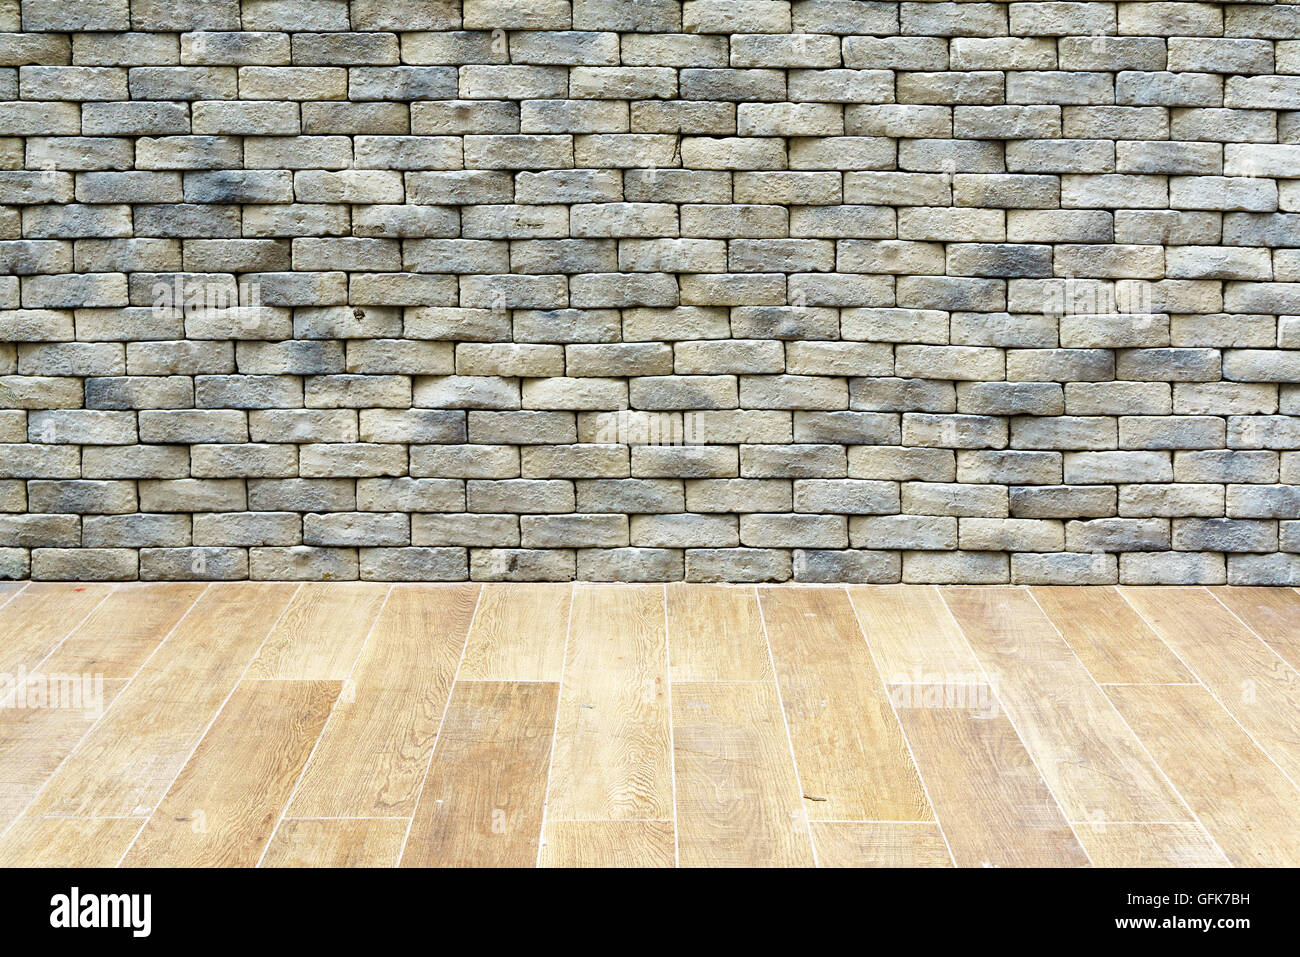 Gray stone brick wall wooden floor room interior background architecture detail Stock Photo